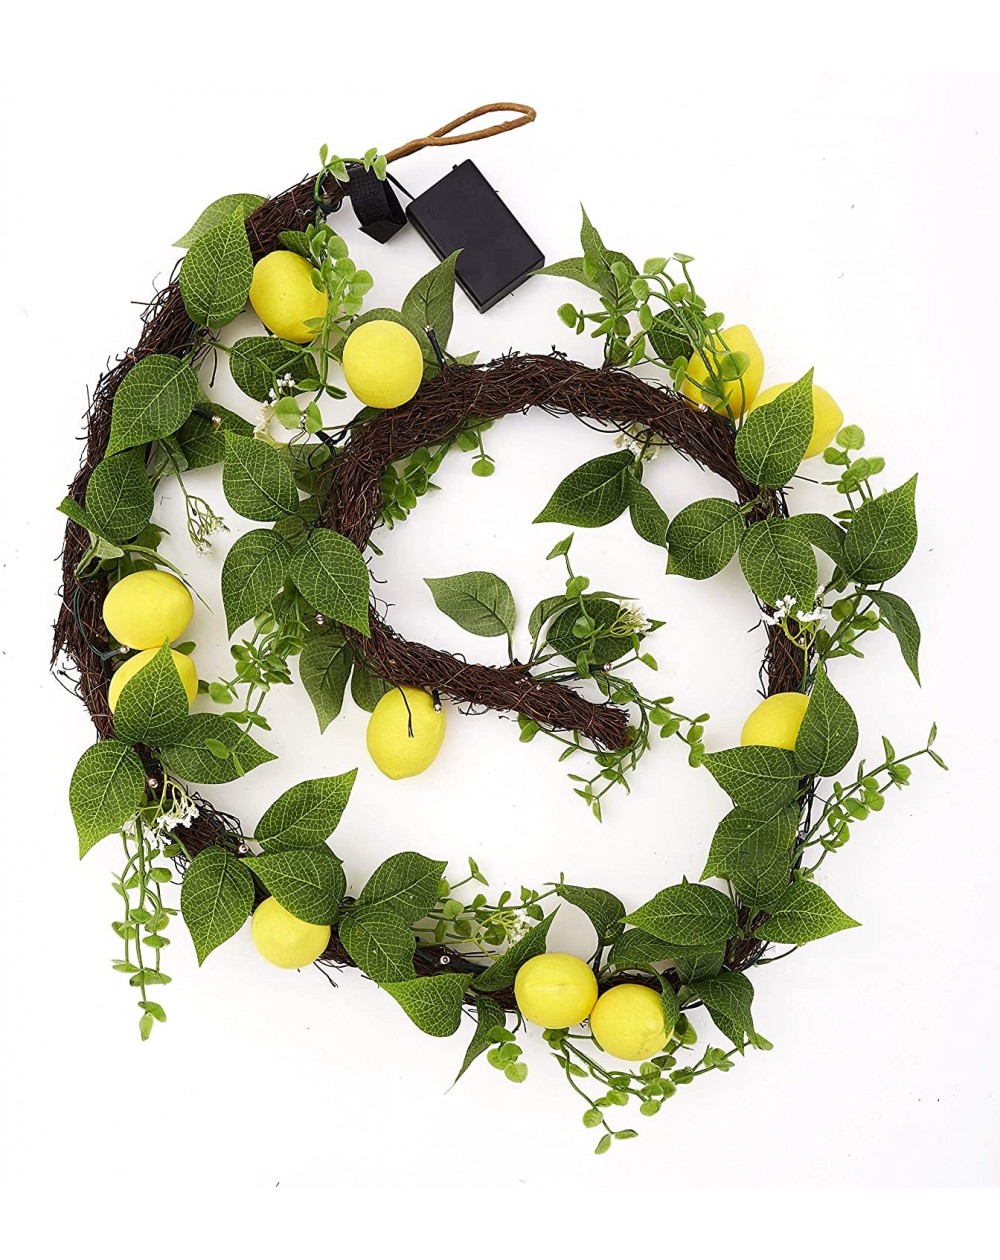 Garlands Farm Fresh Lemon Lighted LED Garland with Faux Foliage - Hanging Wall Decor - C1197CLY09W $48.36